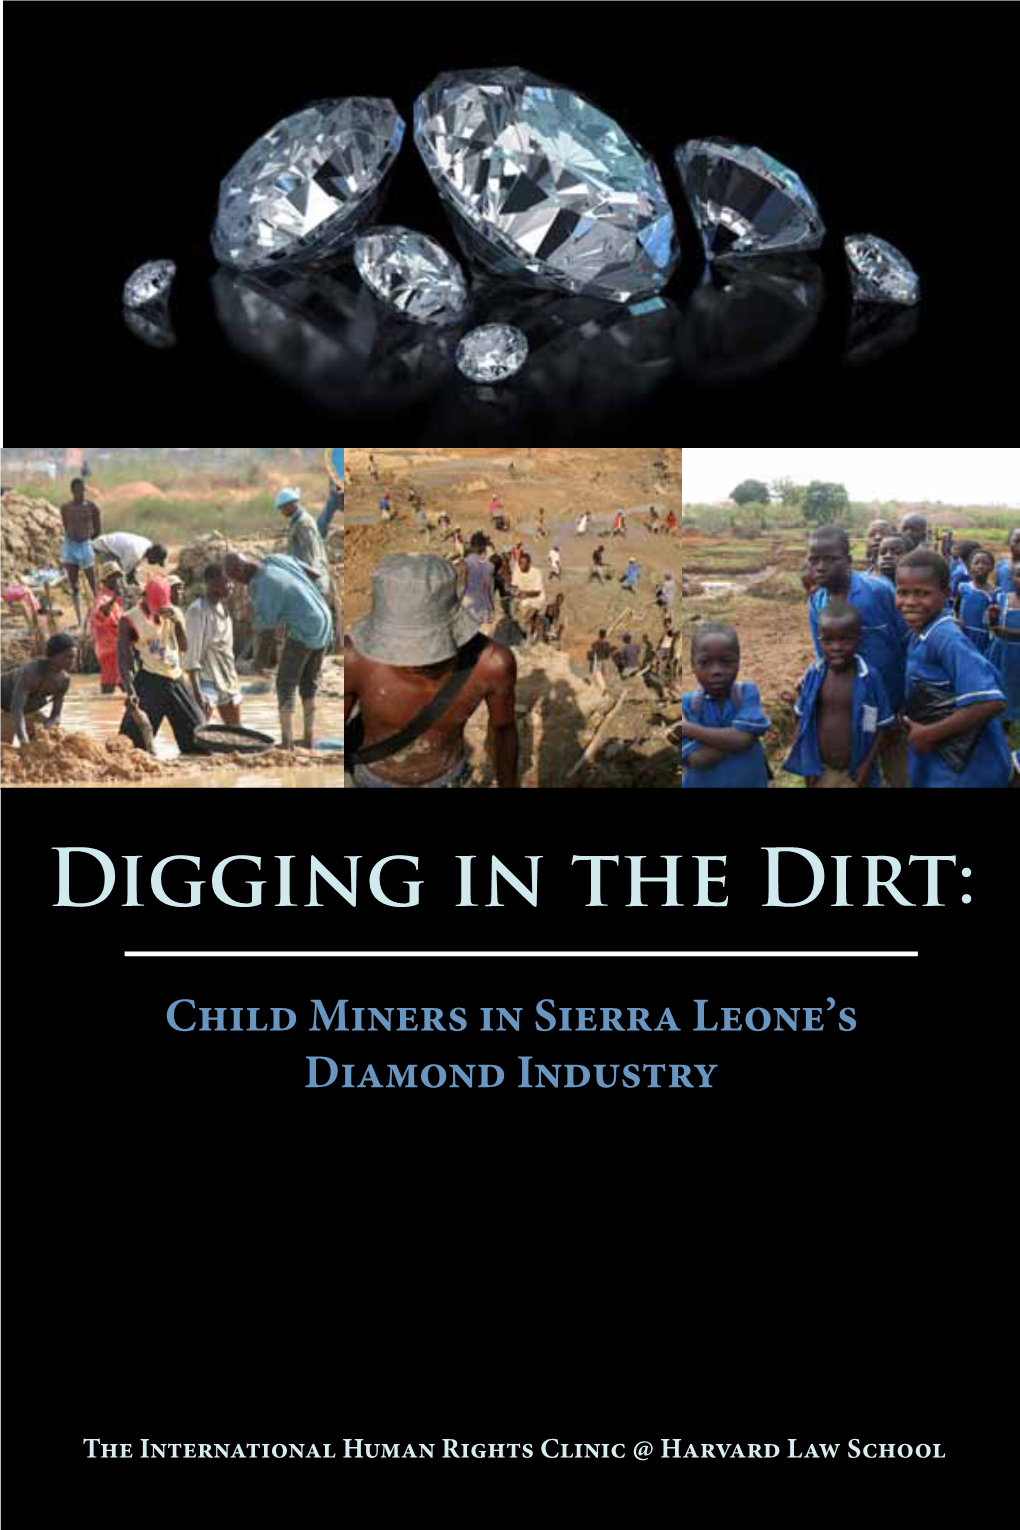 Digging in the Dirt: Child Miners in Sierra Leone's Diamond Industry